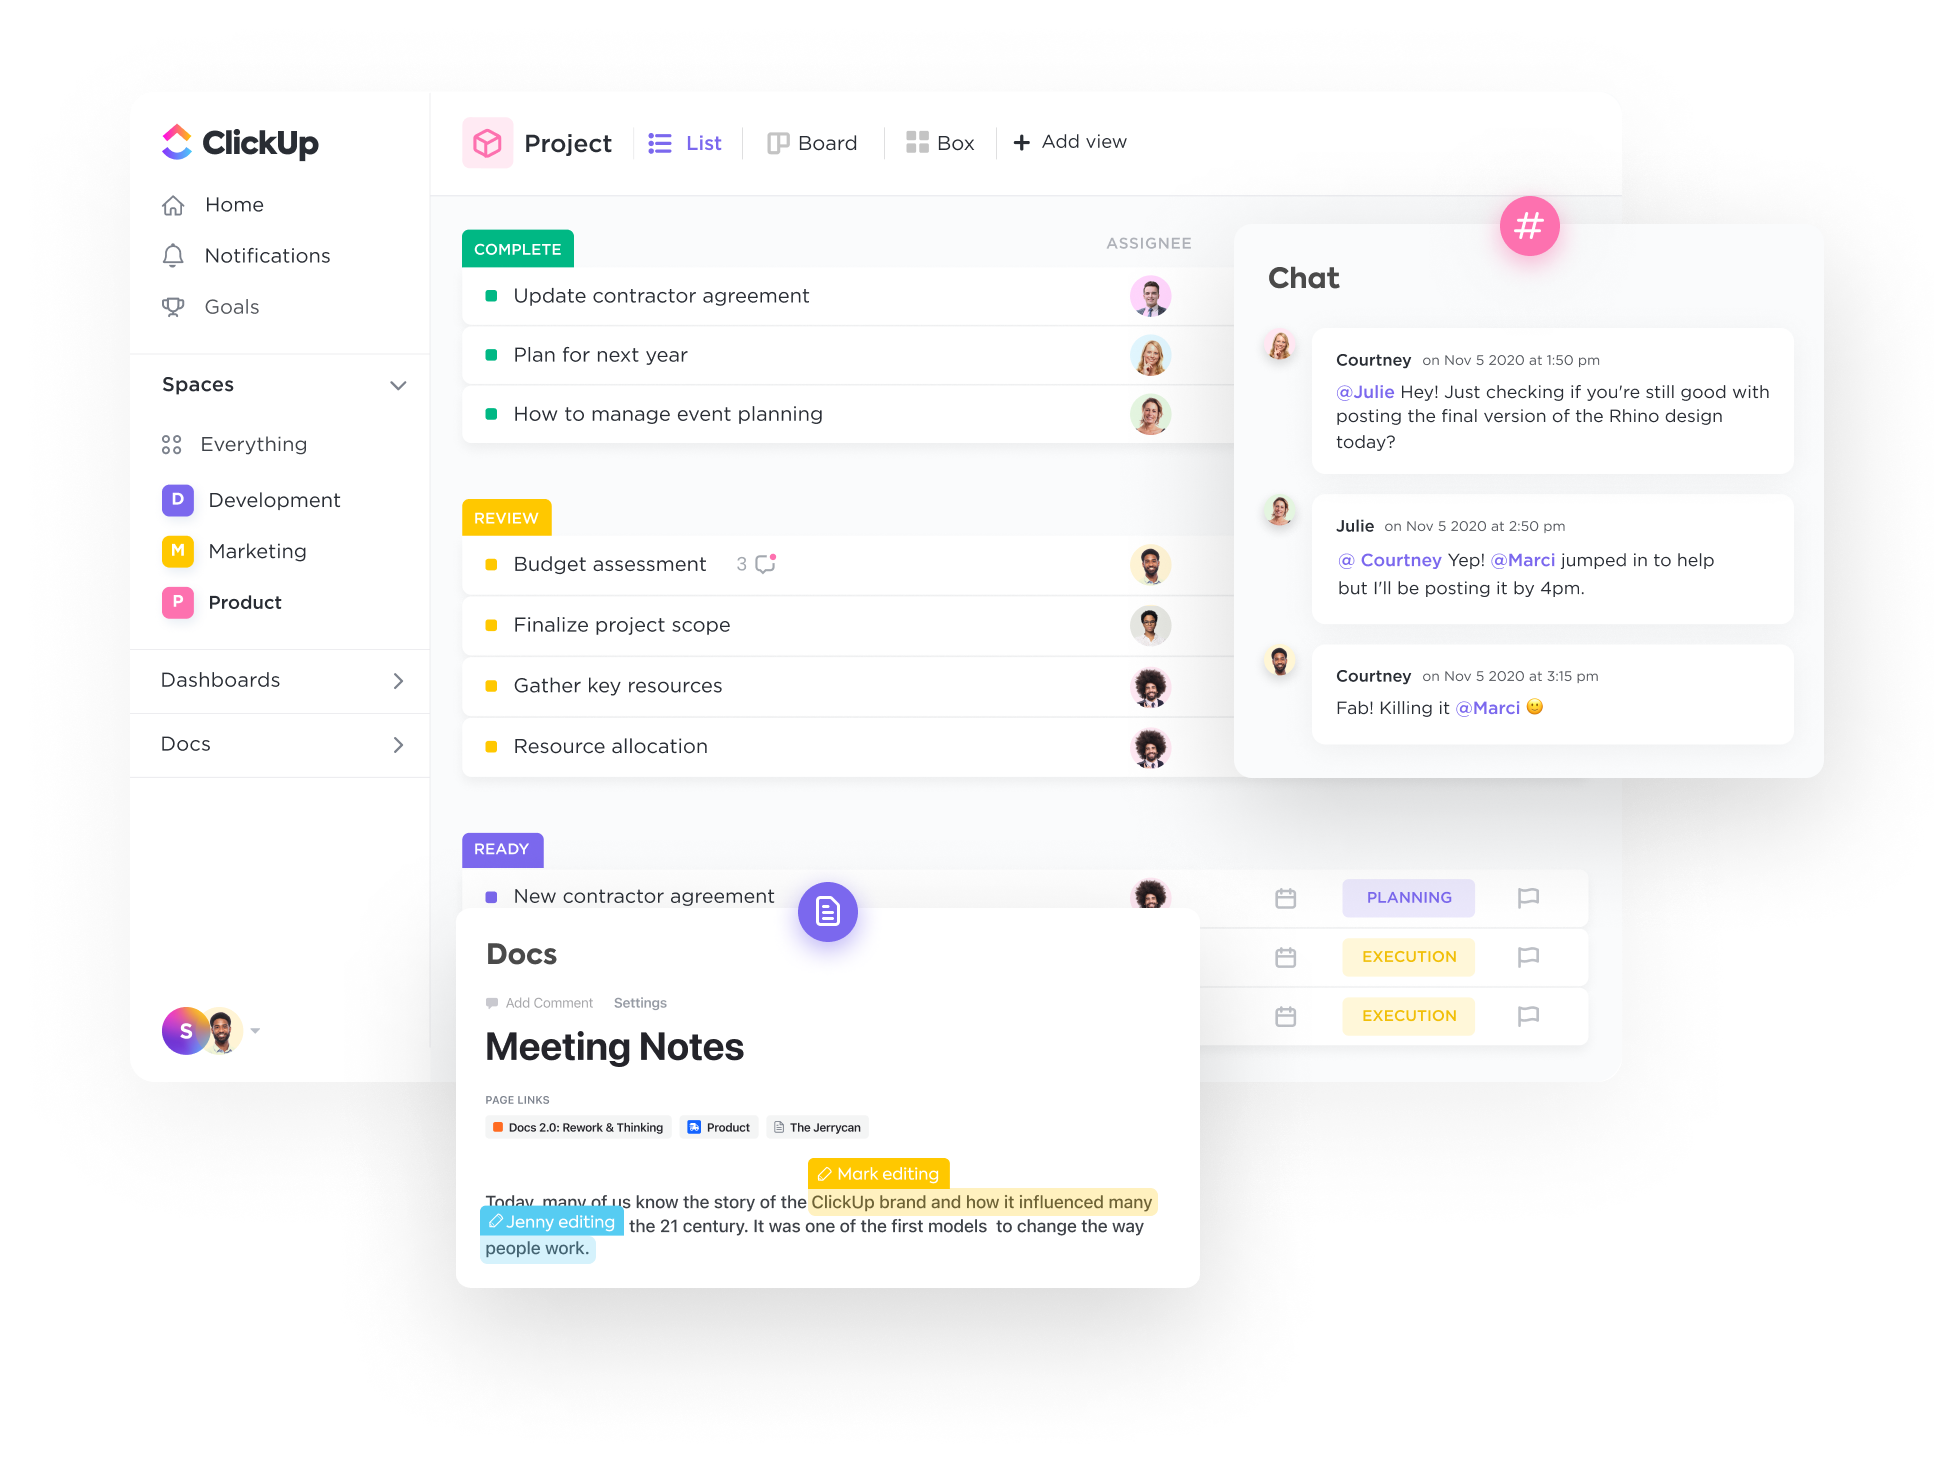 ClickUp is the all-in-one work management solution